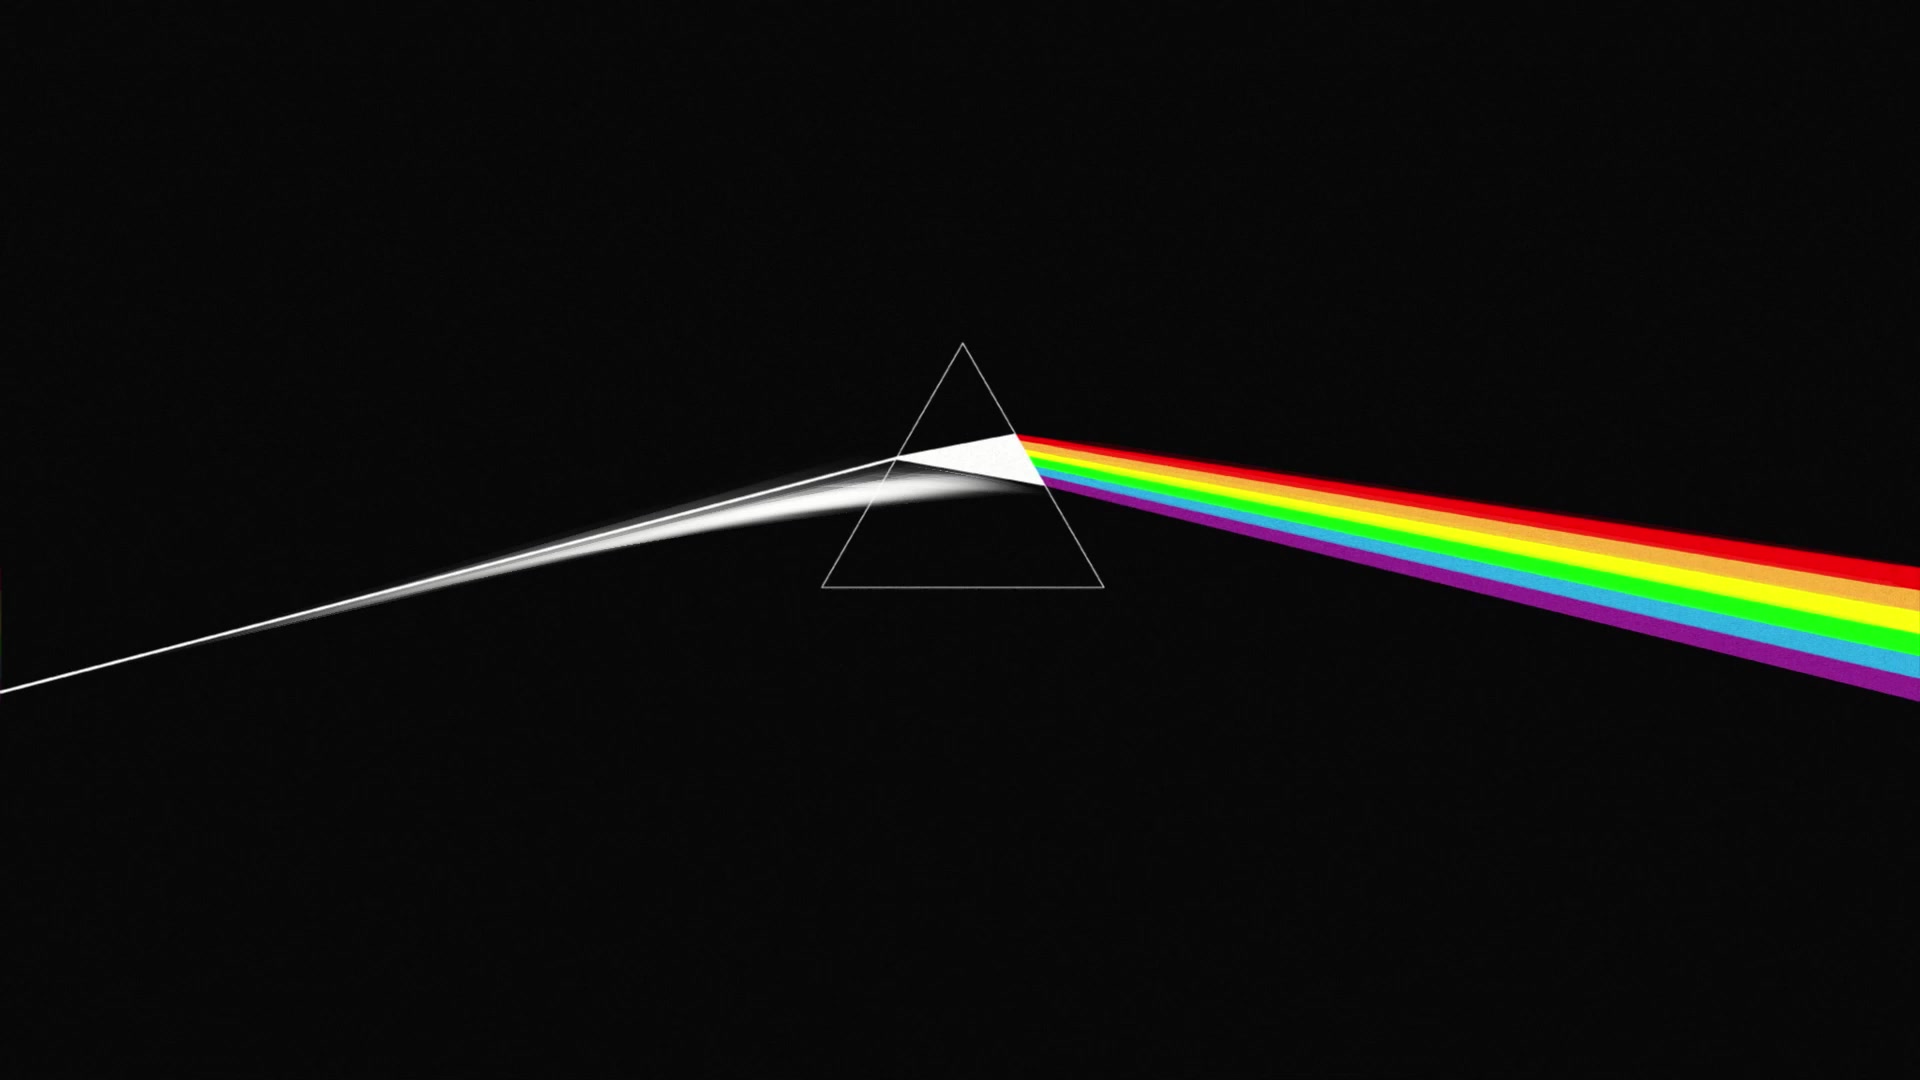 Pink Floyd the dark side of the moon album cover Live Wallpaperx1080 Gallery HD Live Wallpaper